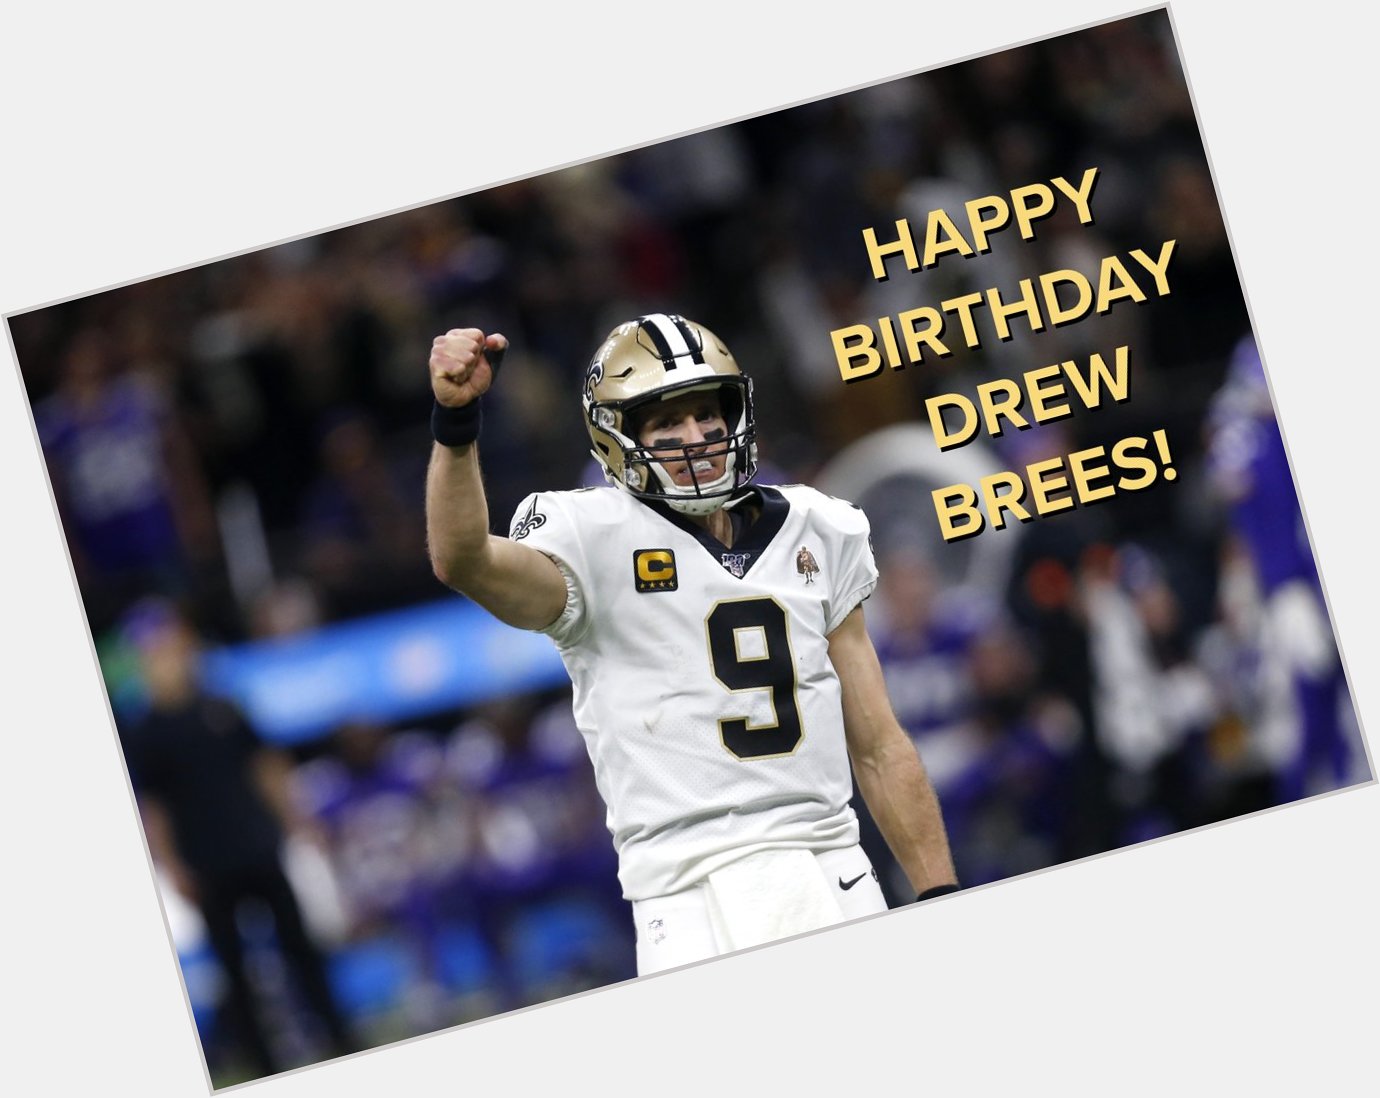 Delgado wishes a very Happy Birthday to Drew Brees! We thank you for all you have done for the city of New Orleans. 